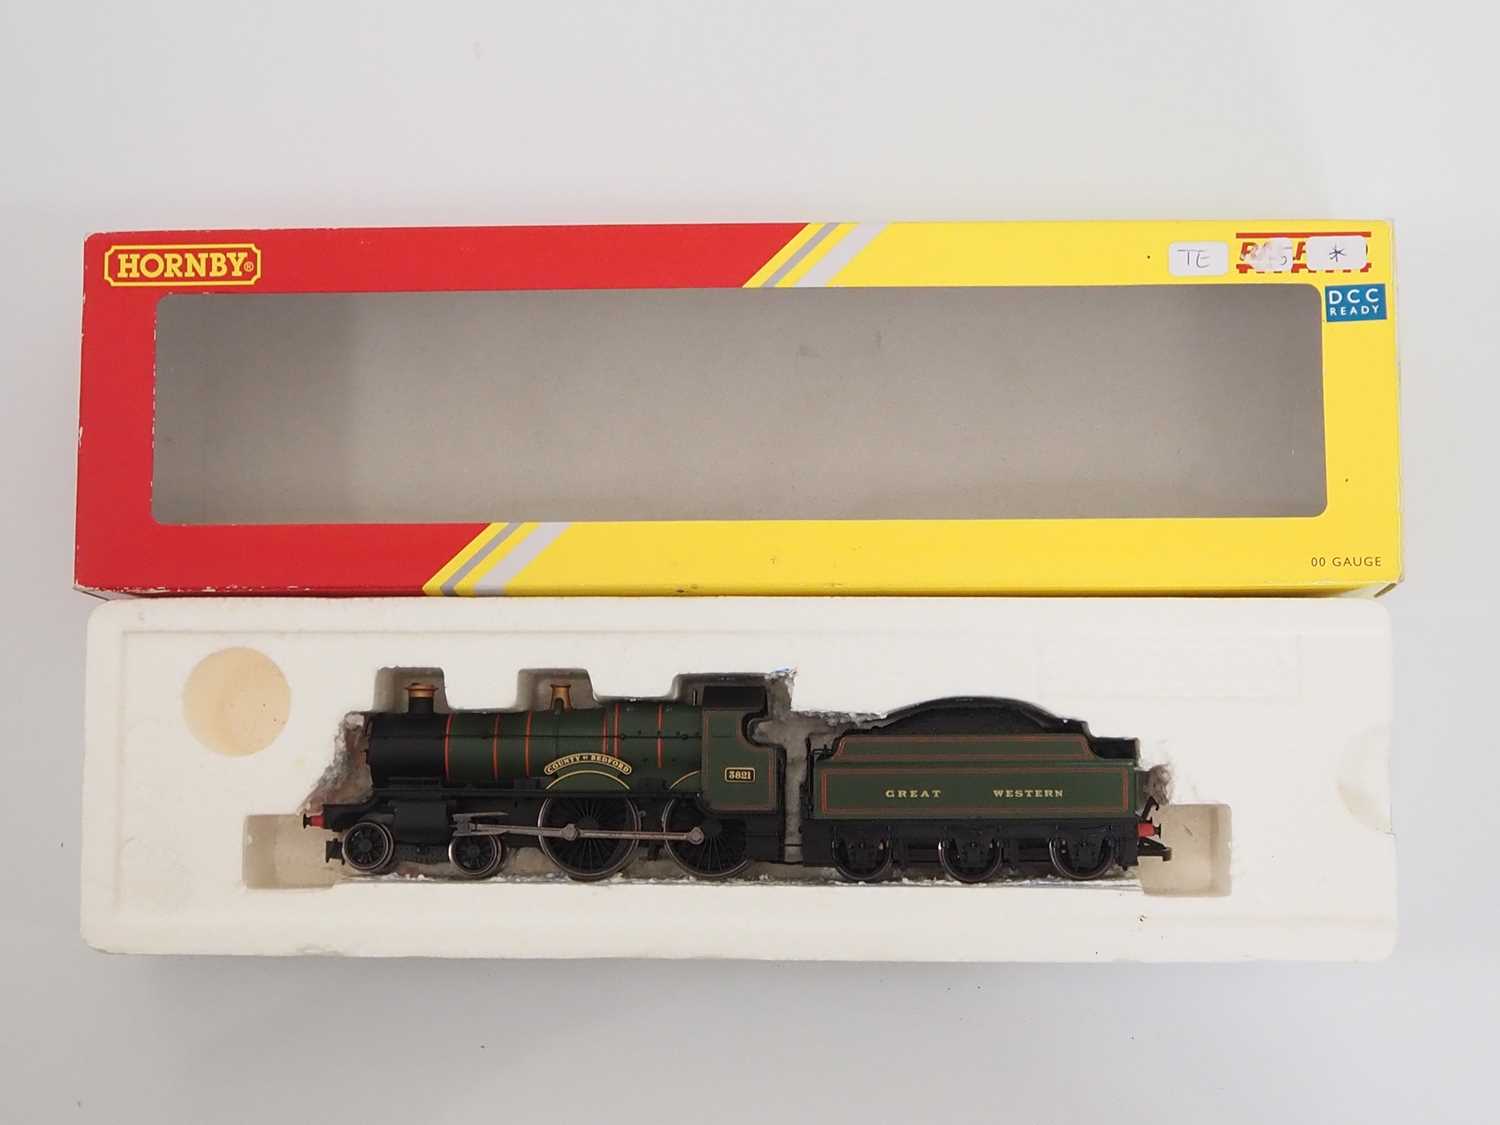 A pair of HORNBY (China) OO gauge steam locomotives in Great Western livery comprising 'Hardwick - Image 2 of 4